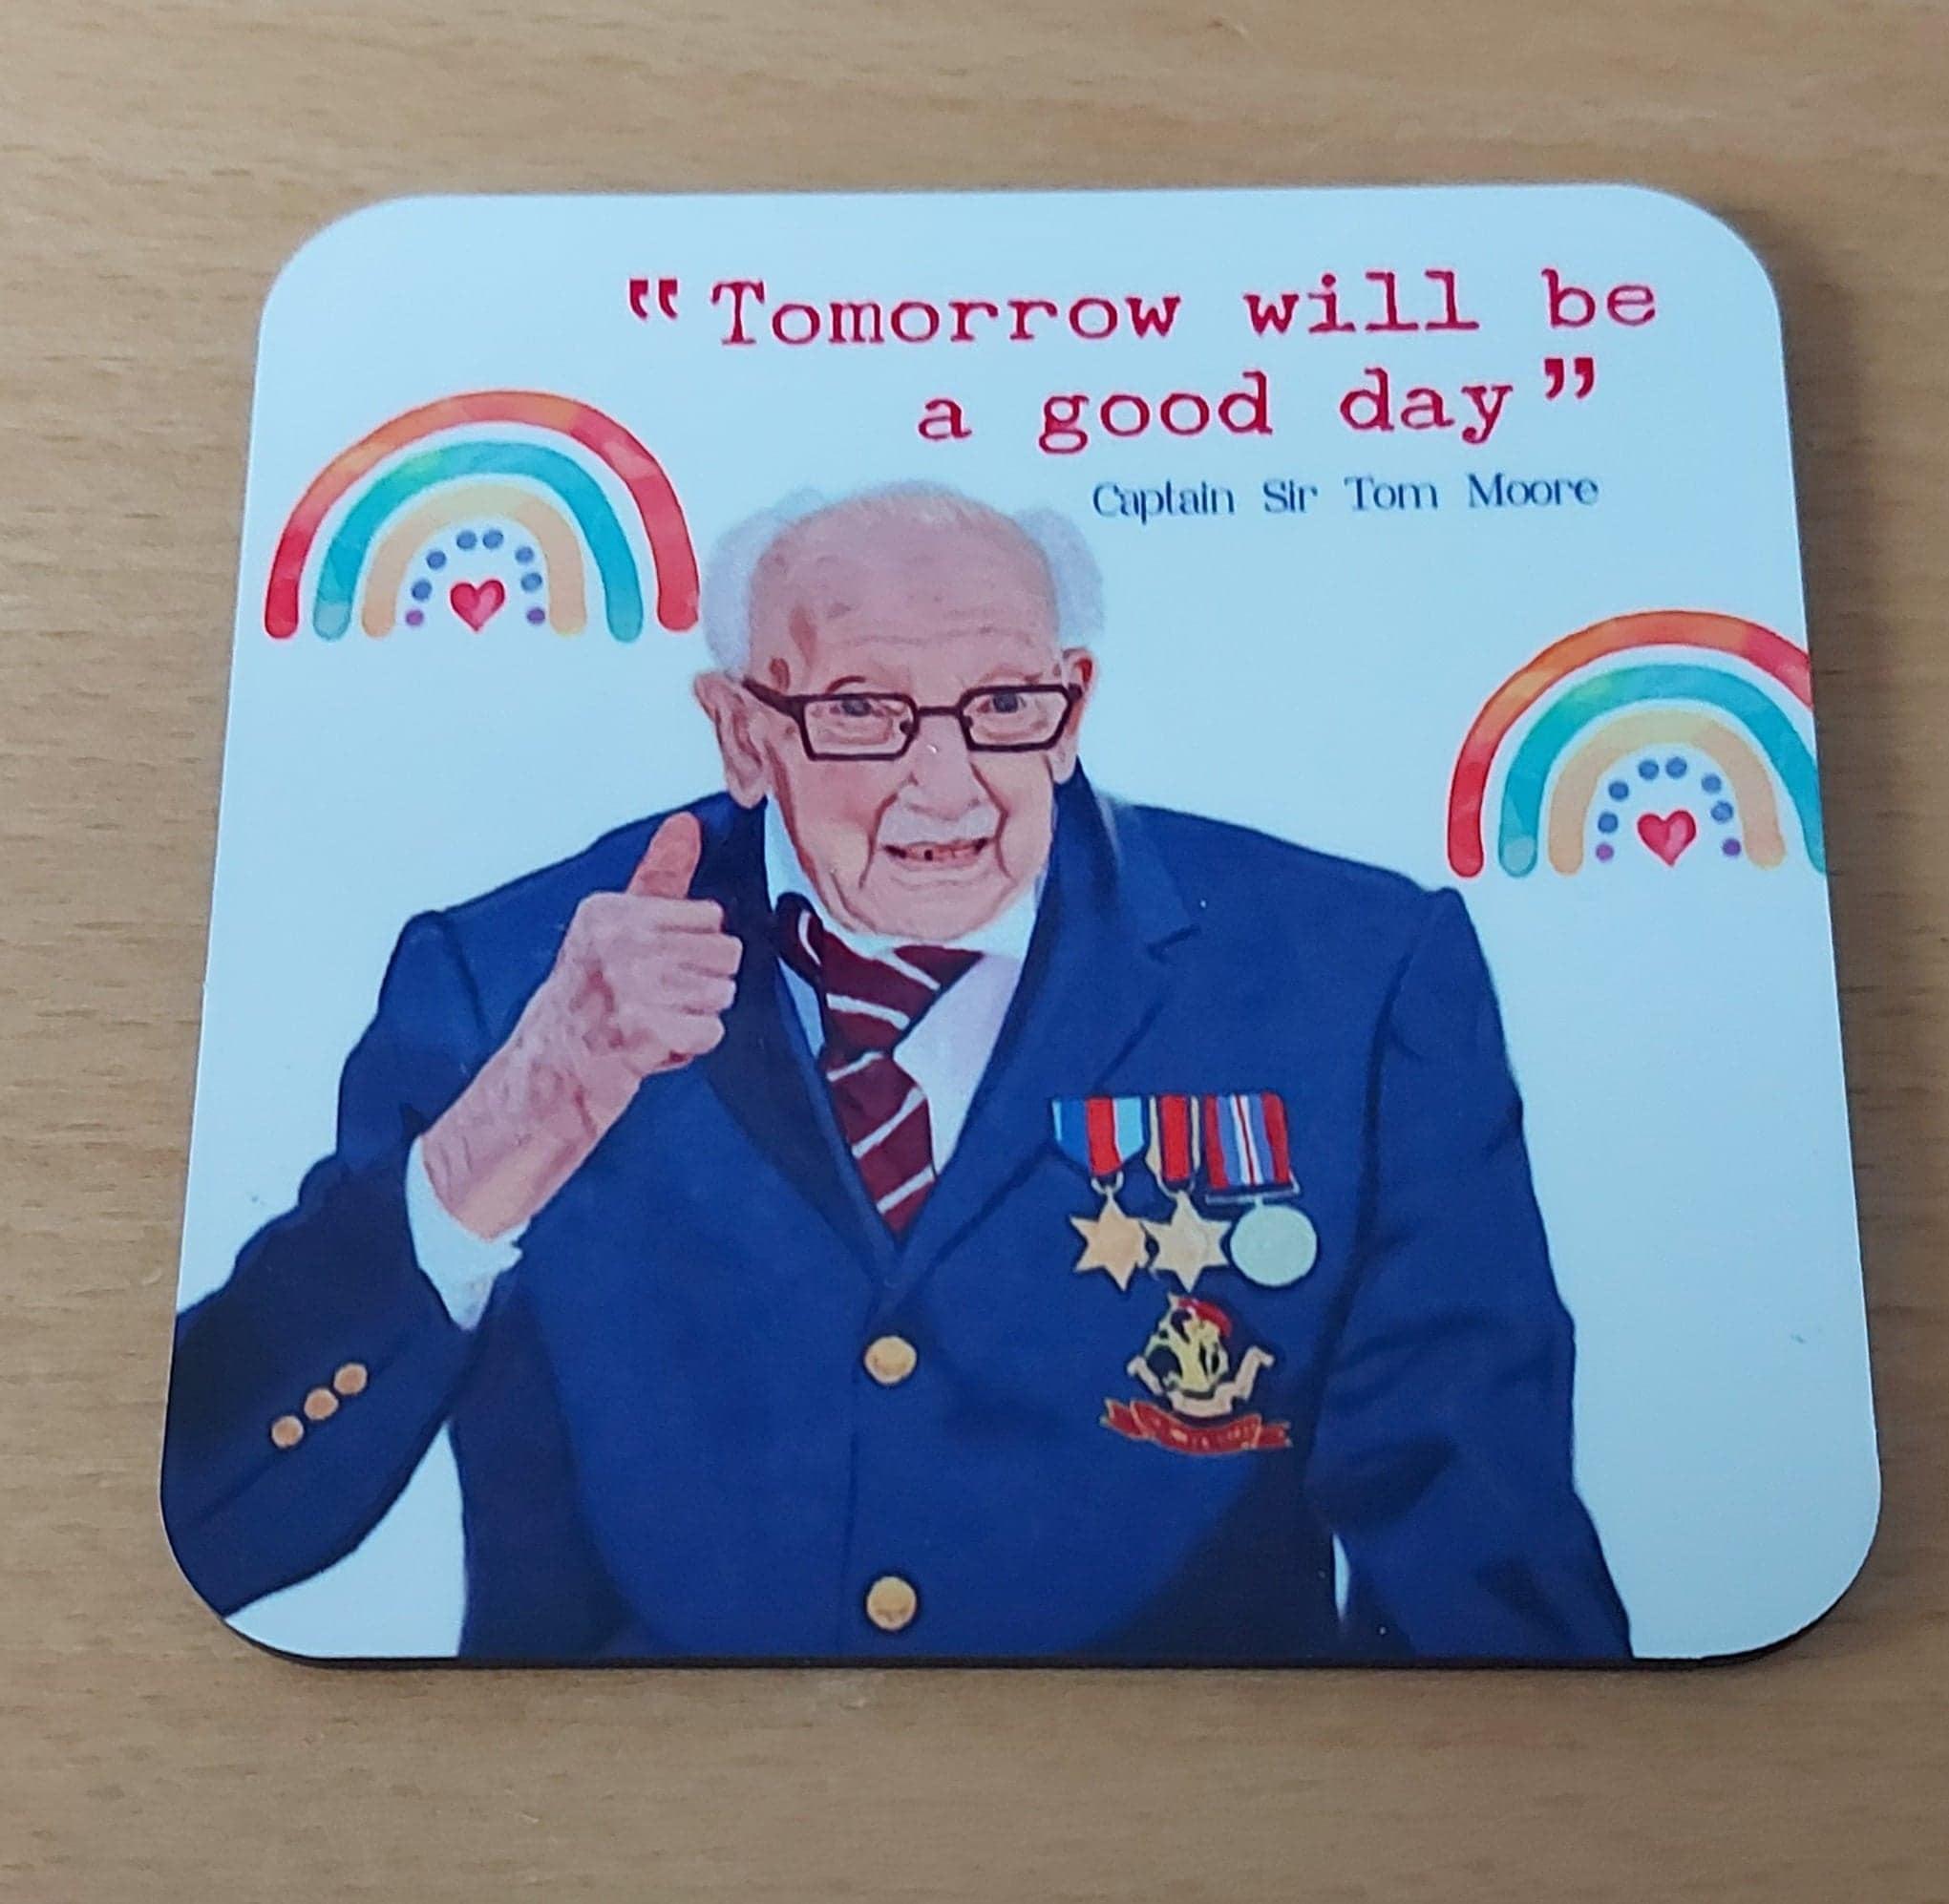 NHS Hero-Captain Sir Tom Moore - Tomorrow will be a good day - Inspirational - motivational heart shaped coaster - NHS -Rainbow